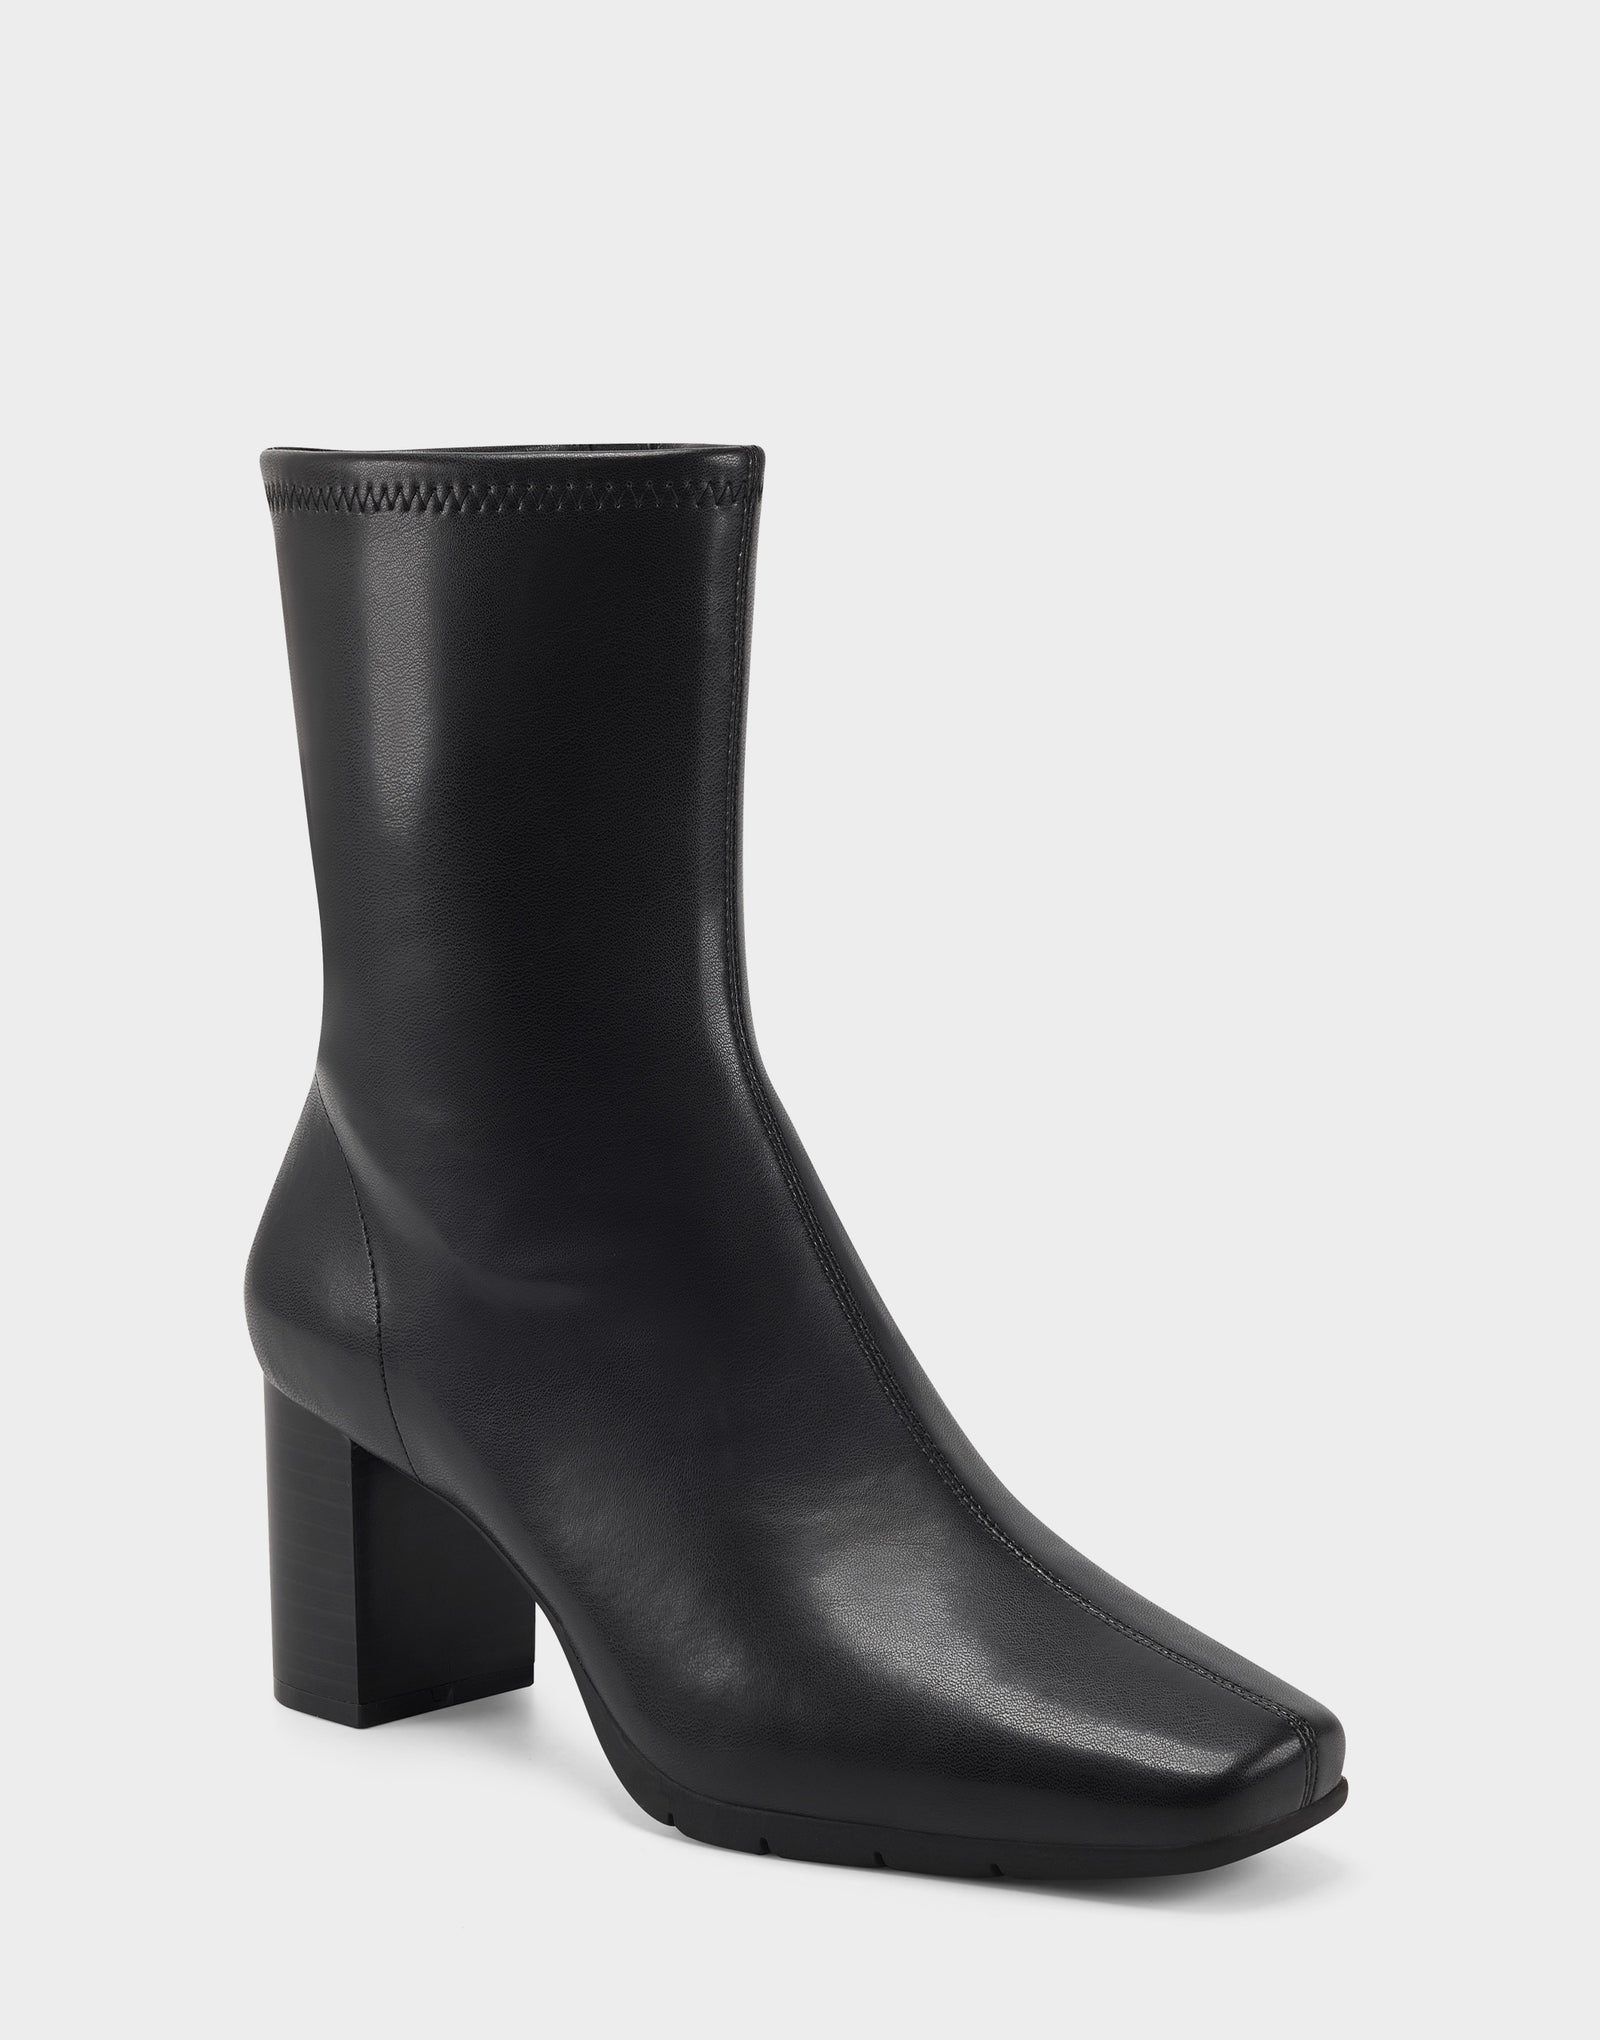 From casual everyday ankle boots to versatile block-heel booties